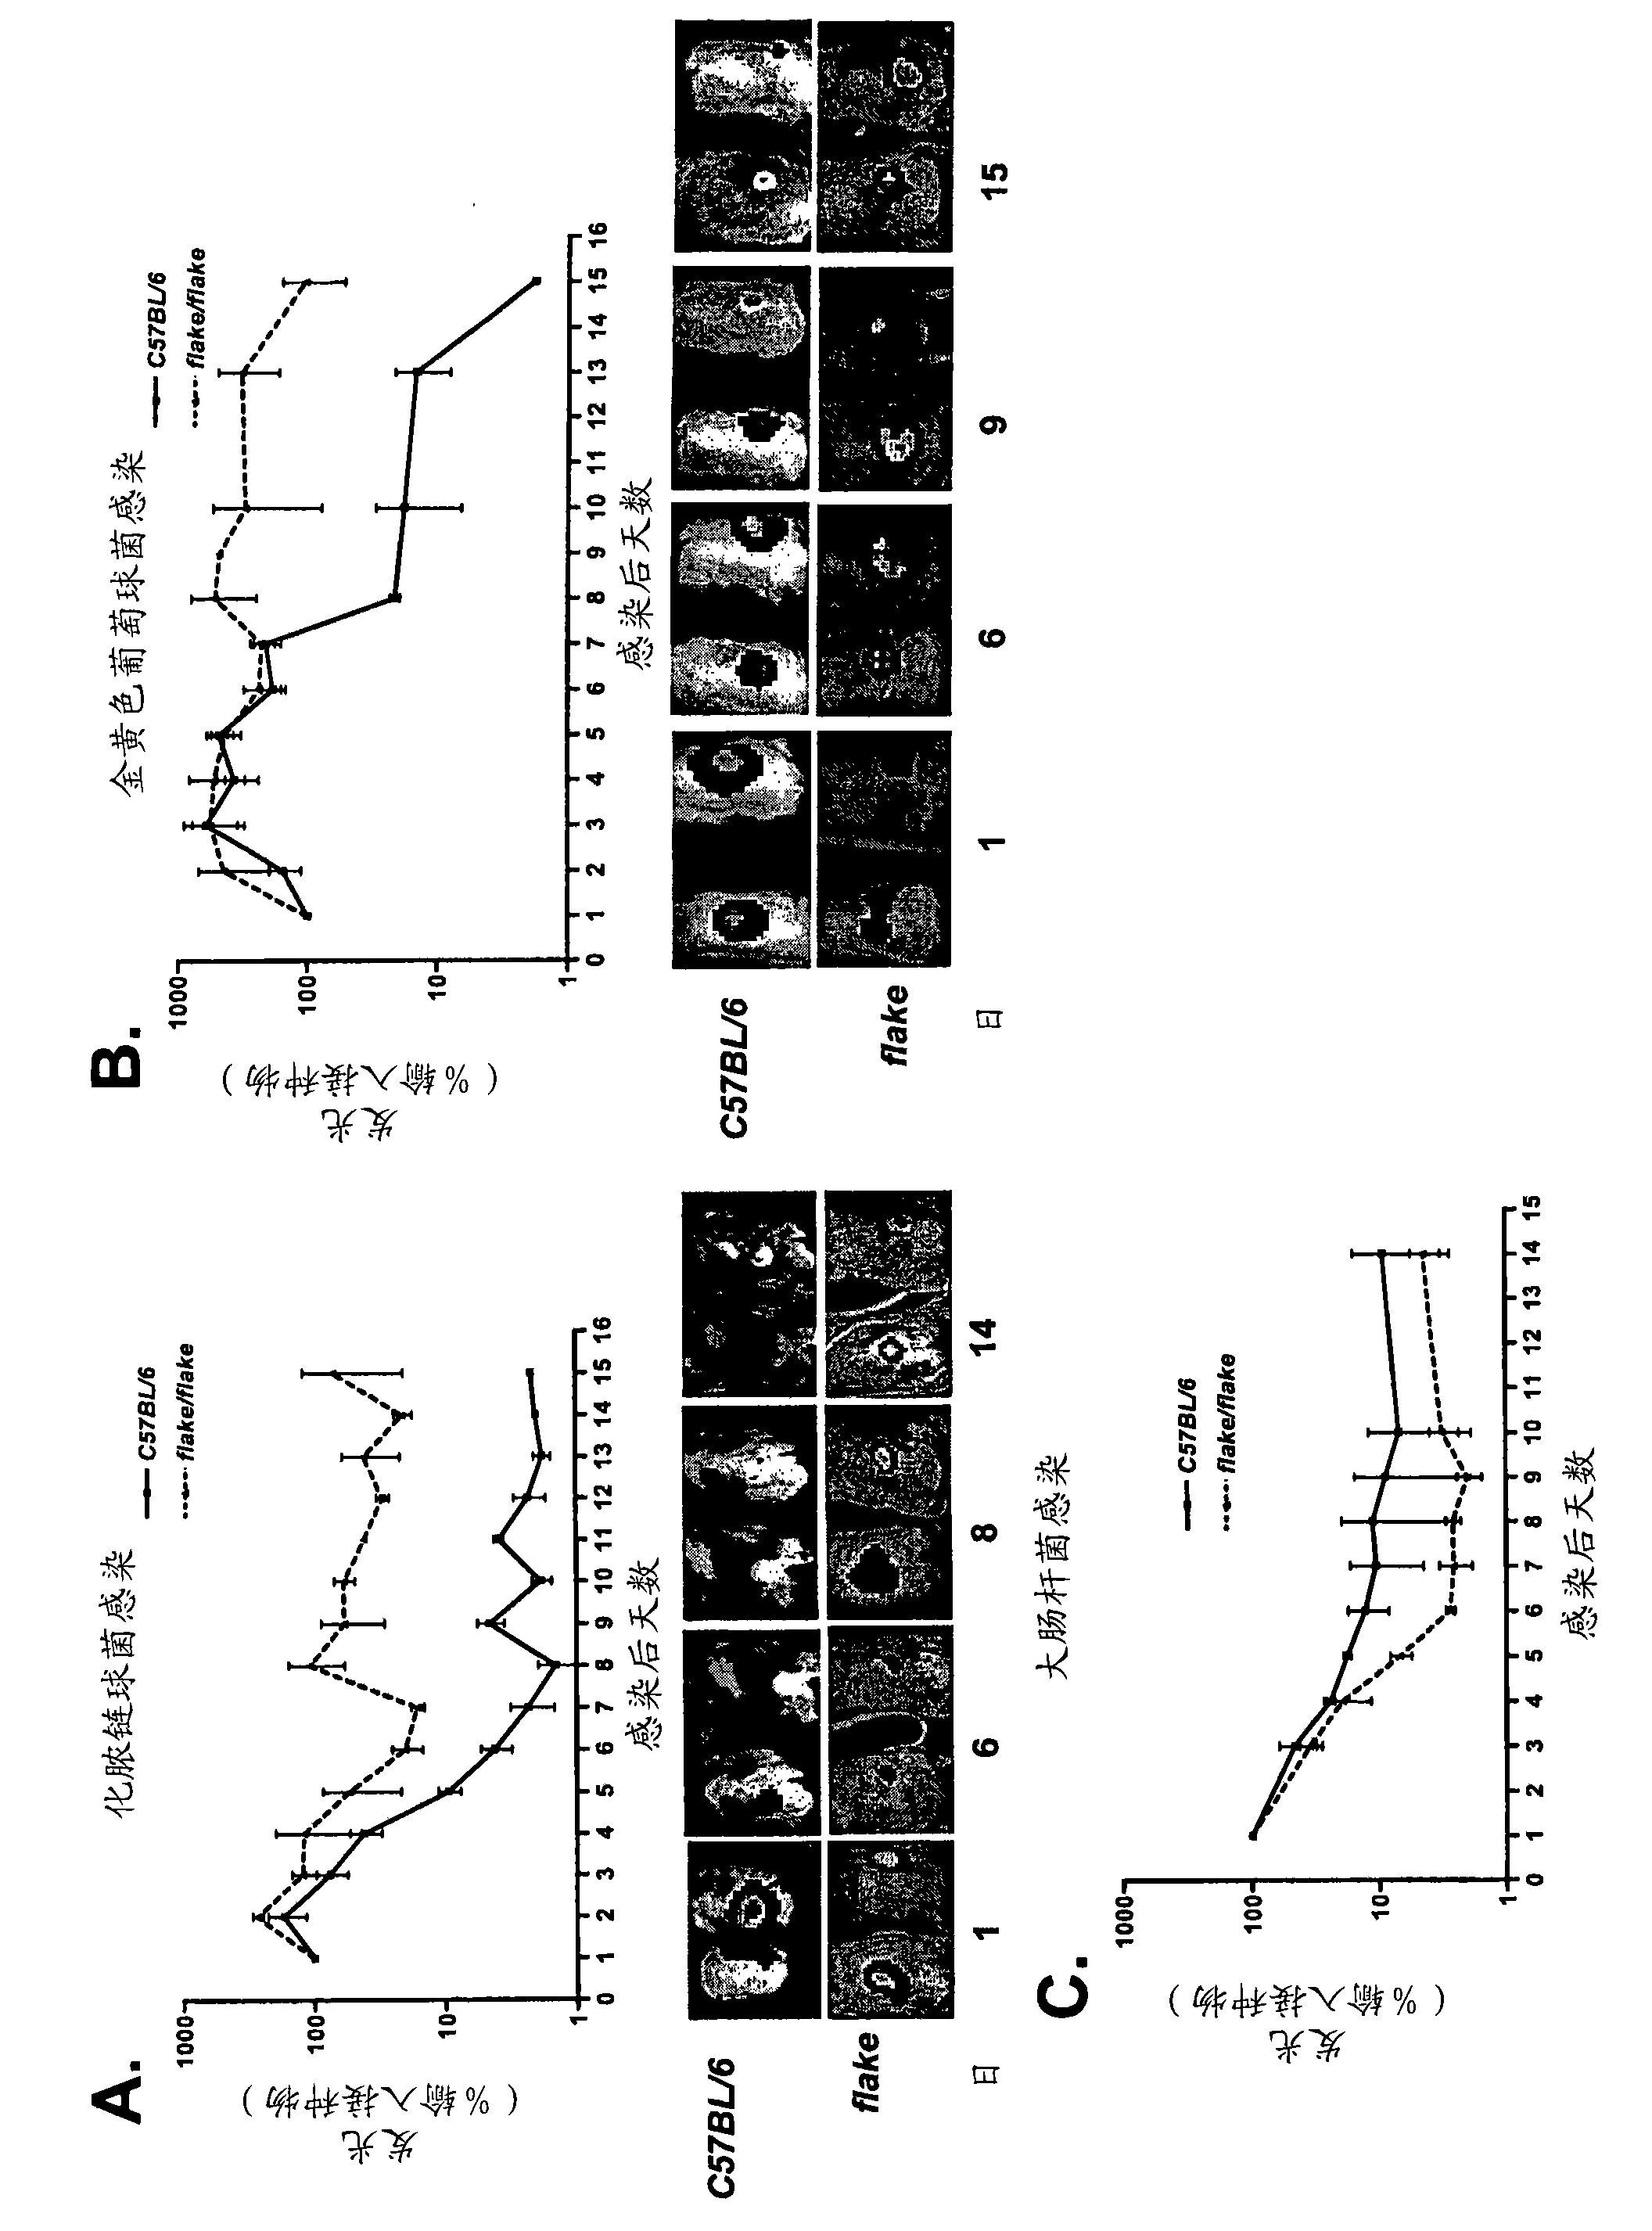 Compositions and methods for treating gram positive bacterial infection in a mammalian subject